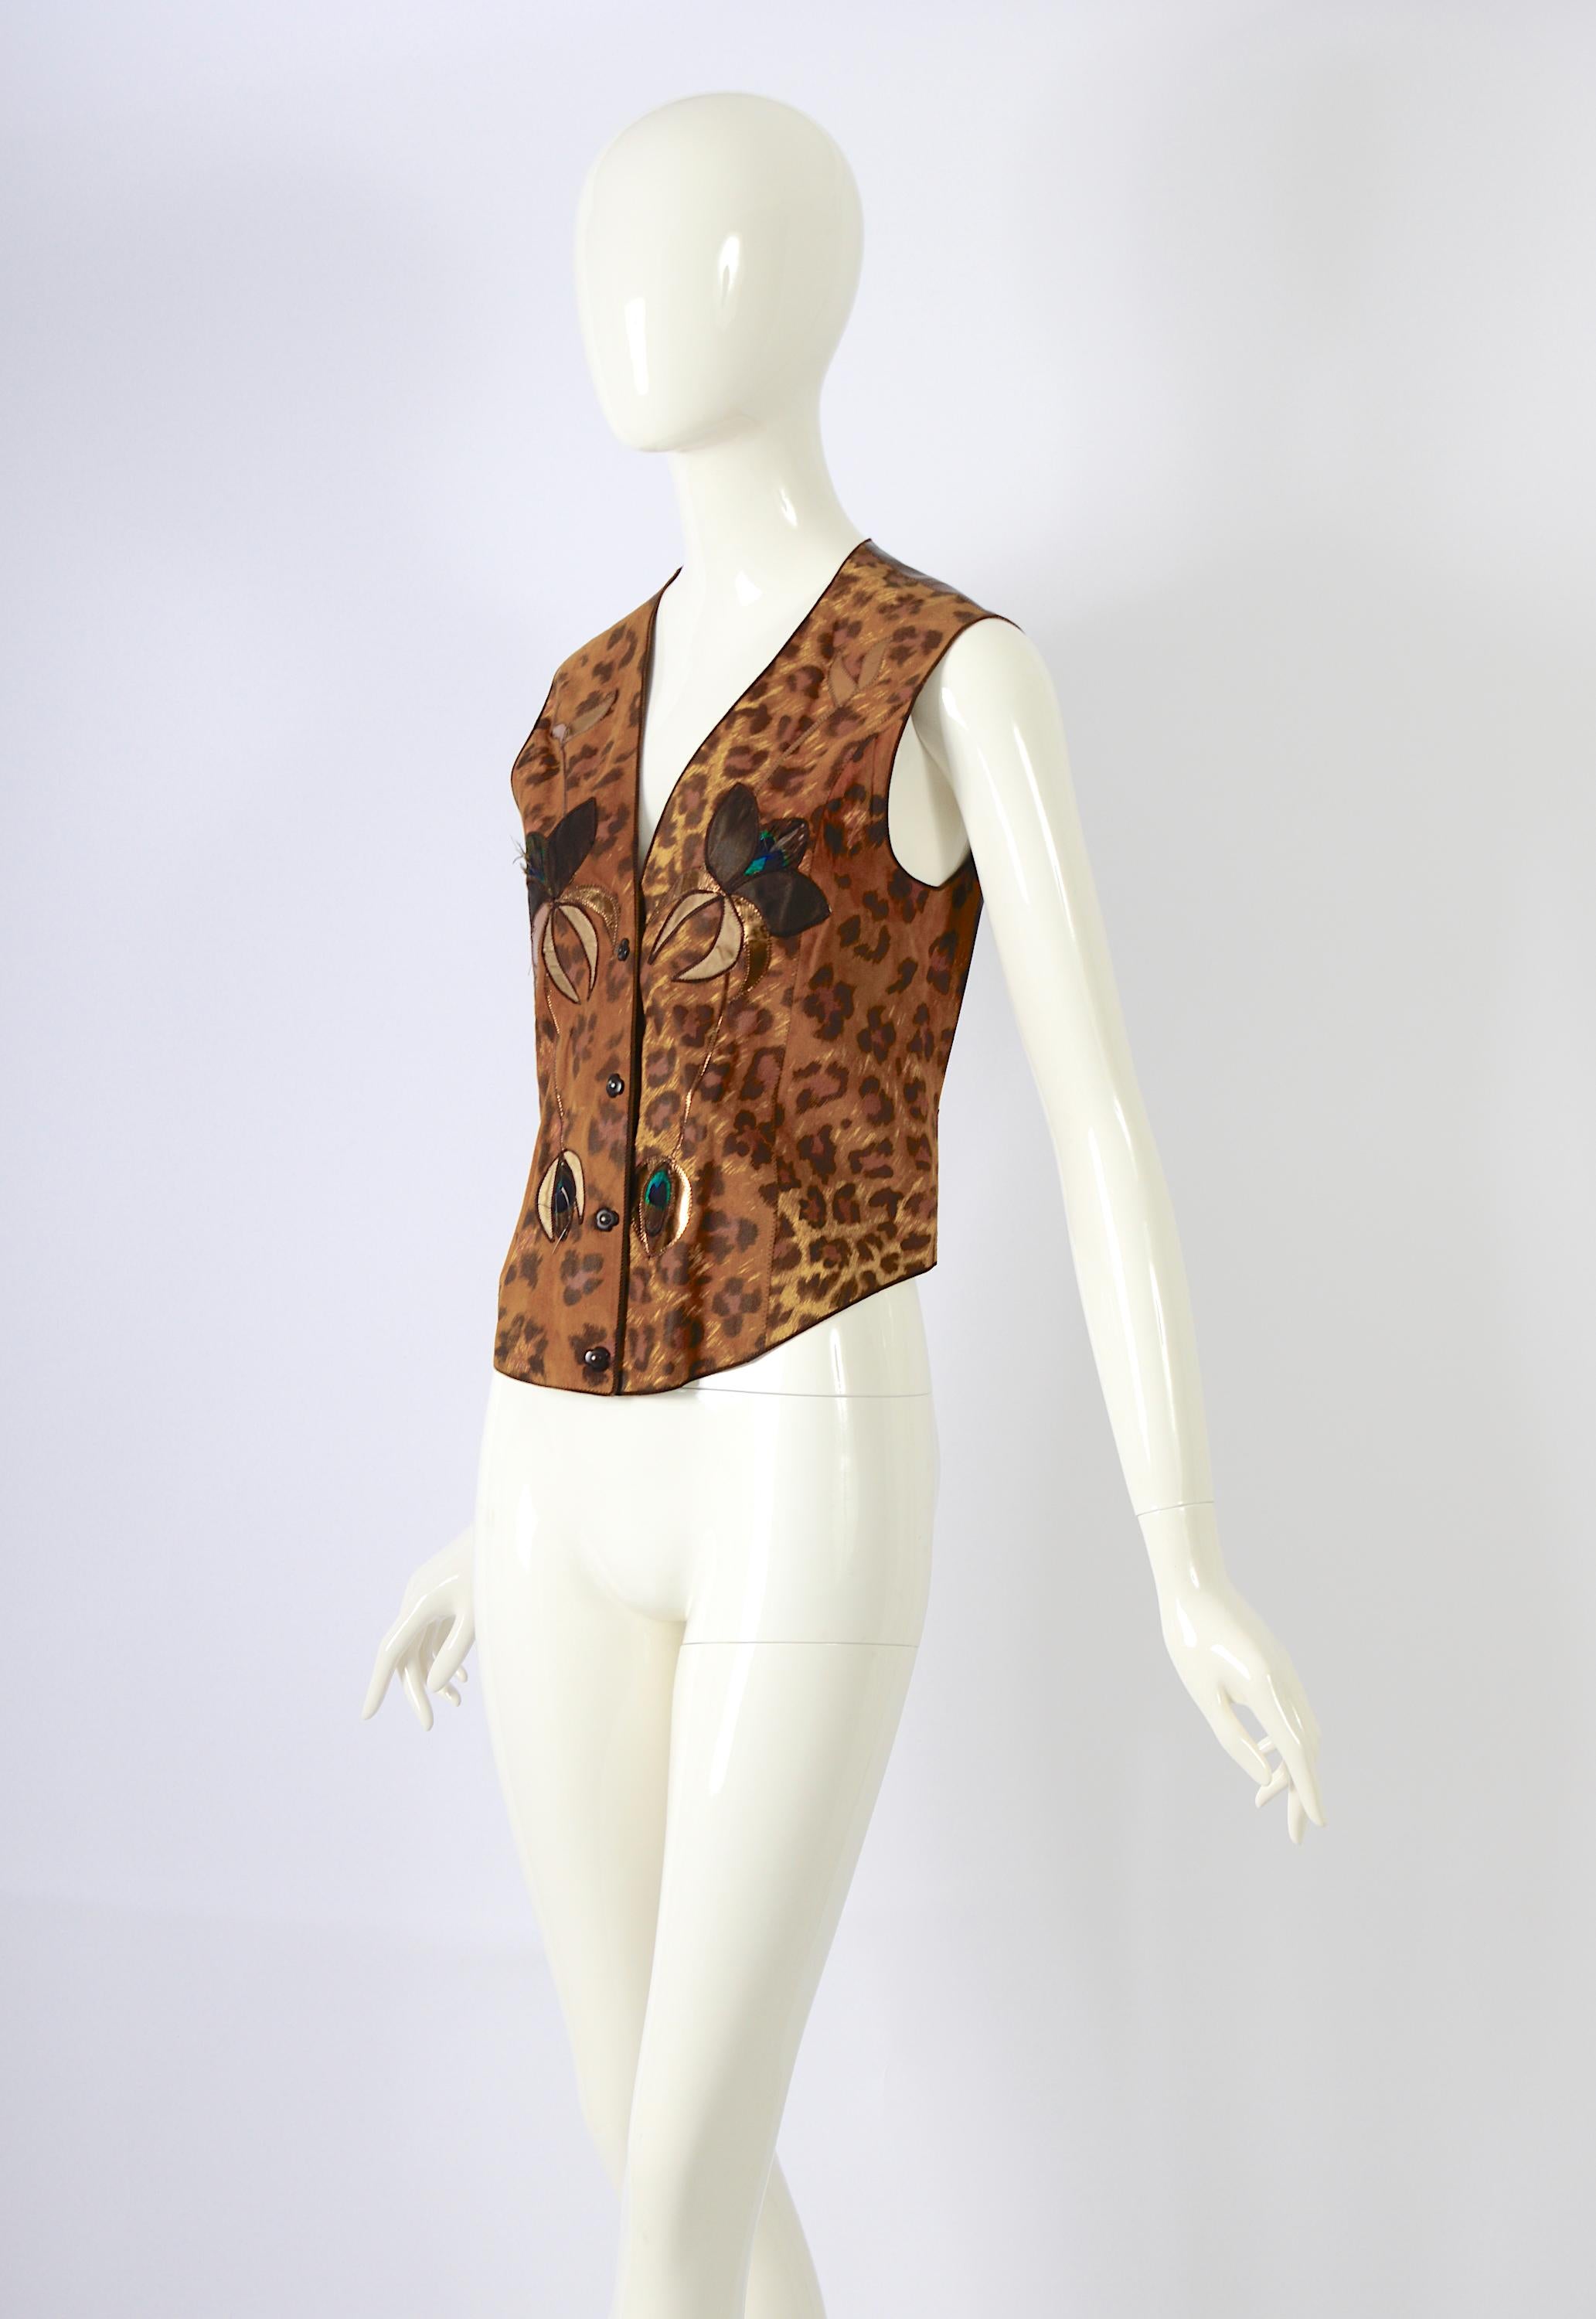 Roberto Cavalli 1970's Vintage Leather & Suede Patchwork Embellished Vests  In Excellent Condition For Sale In Antwerpen, Vlaams Gewest